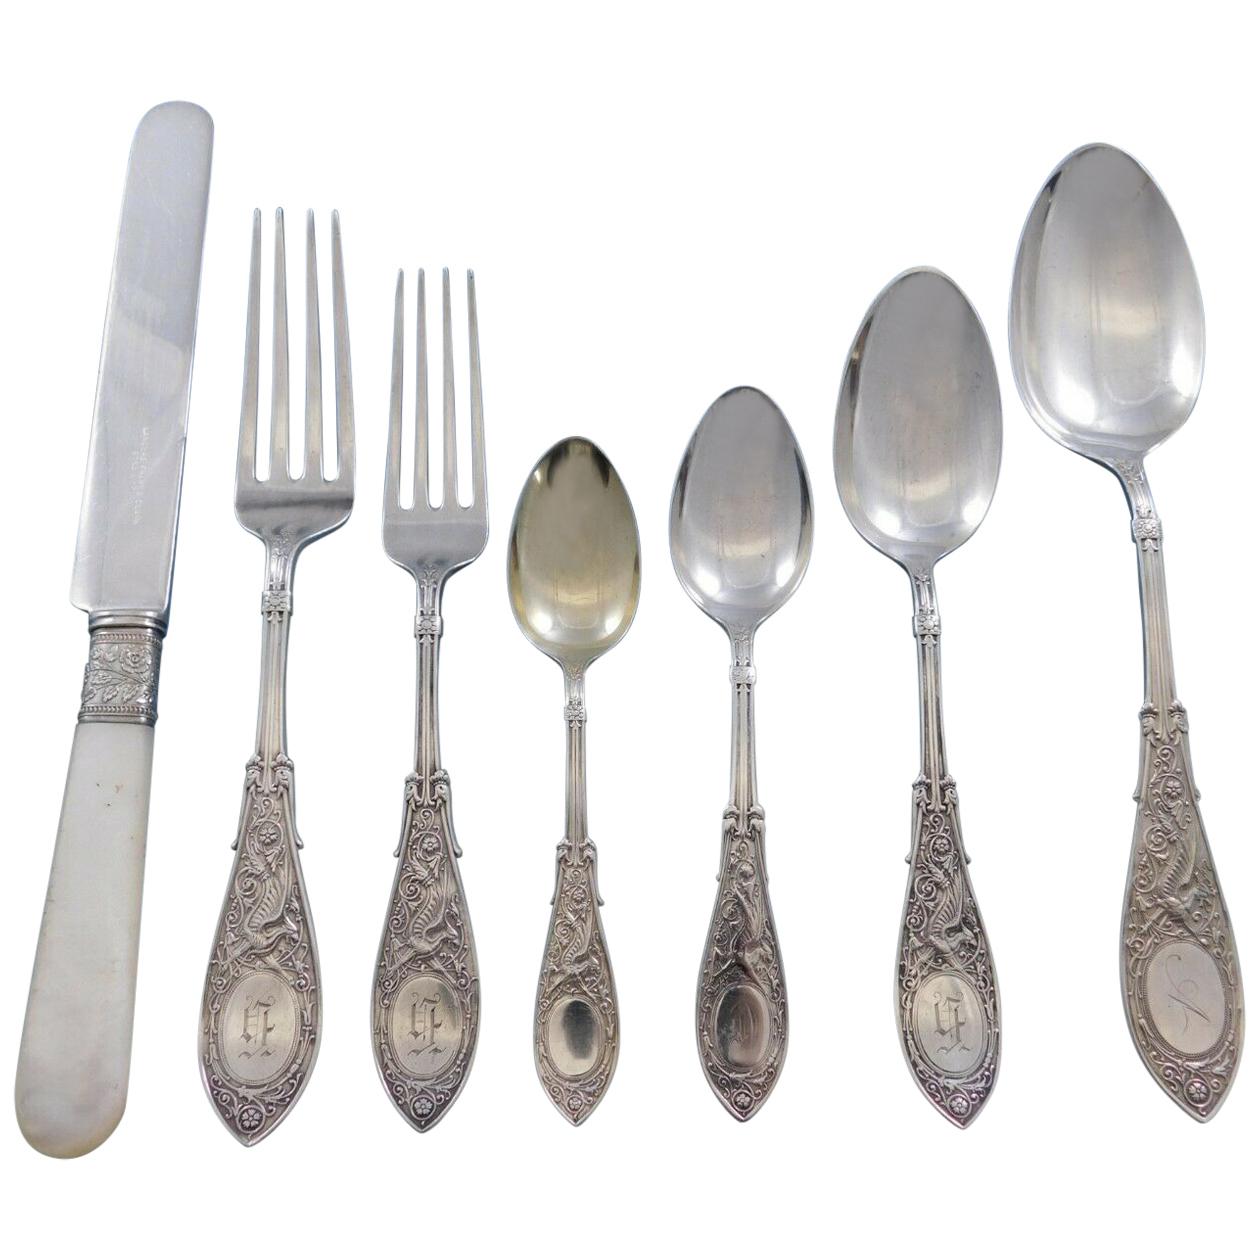 Arabesque by Whiting Sterling Silver Flatware Set 8 Service 56 Pieces Figural